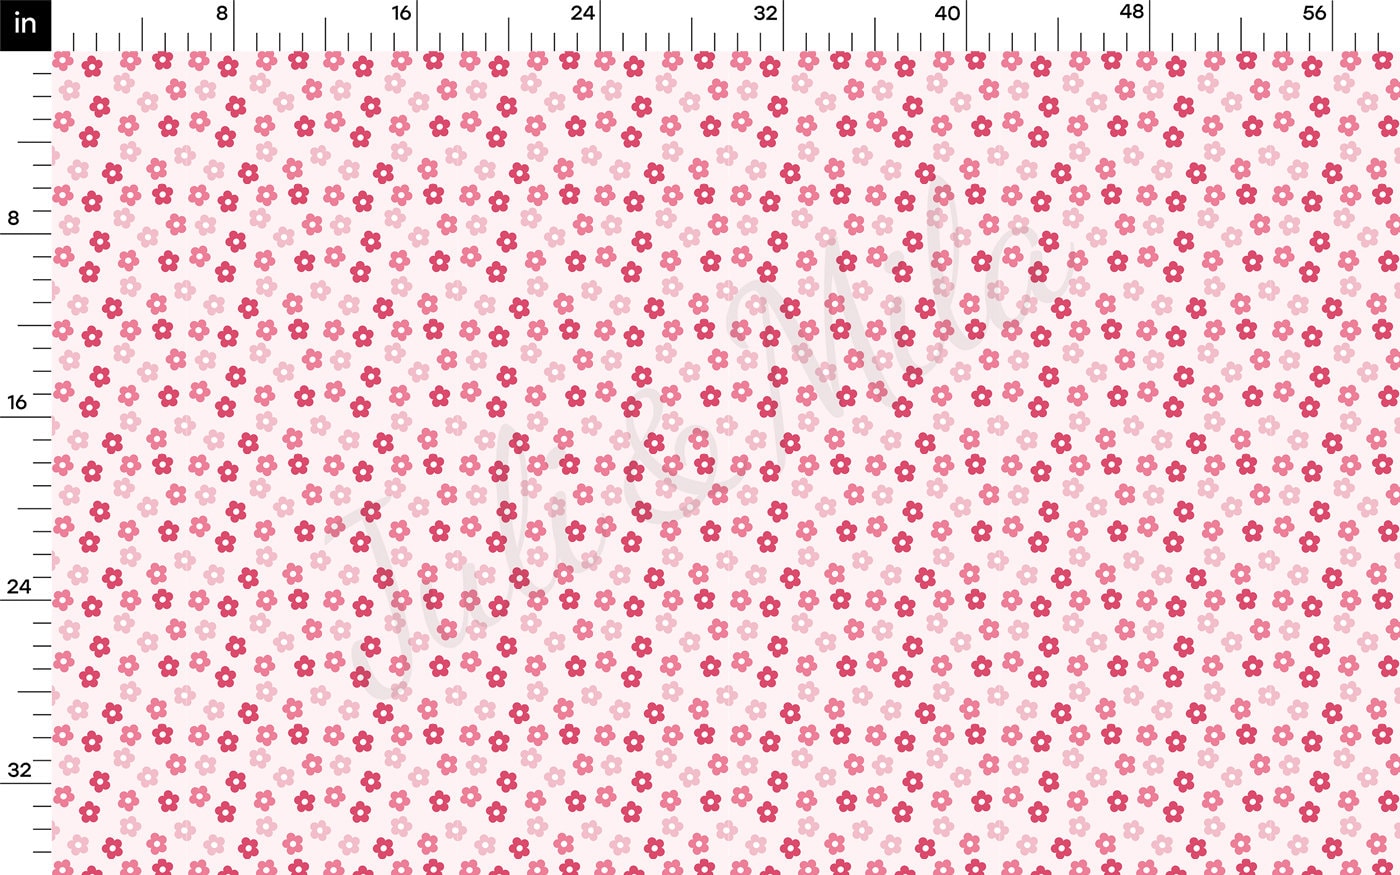 DBP Fabric Double Brushed Polyester Fabric DBP2299 Valentine's Day